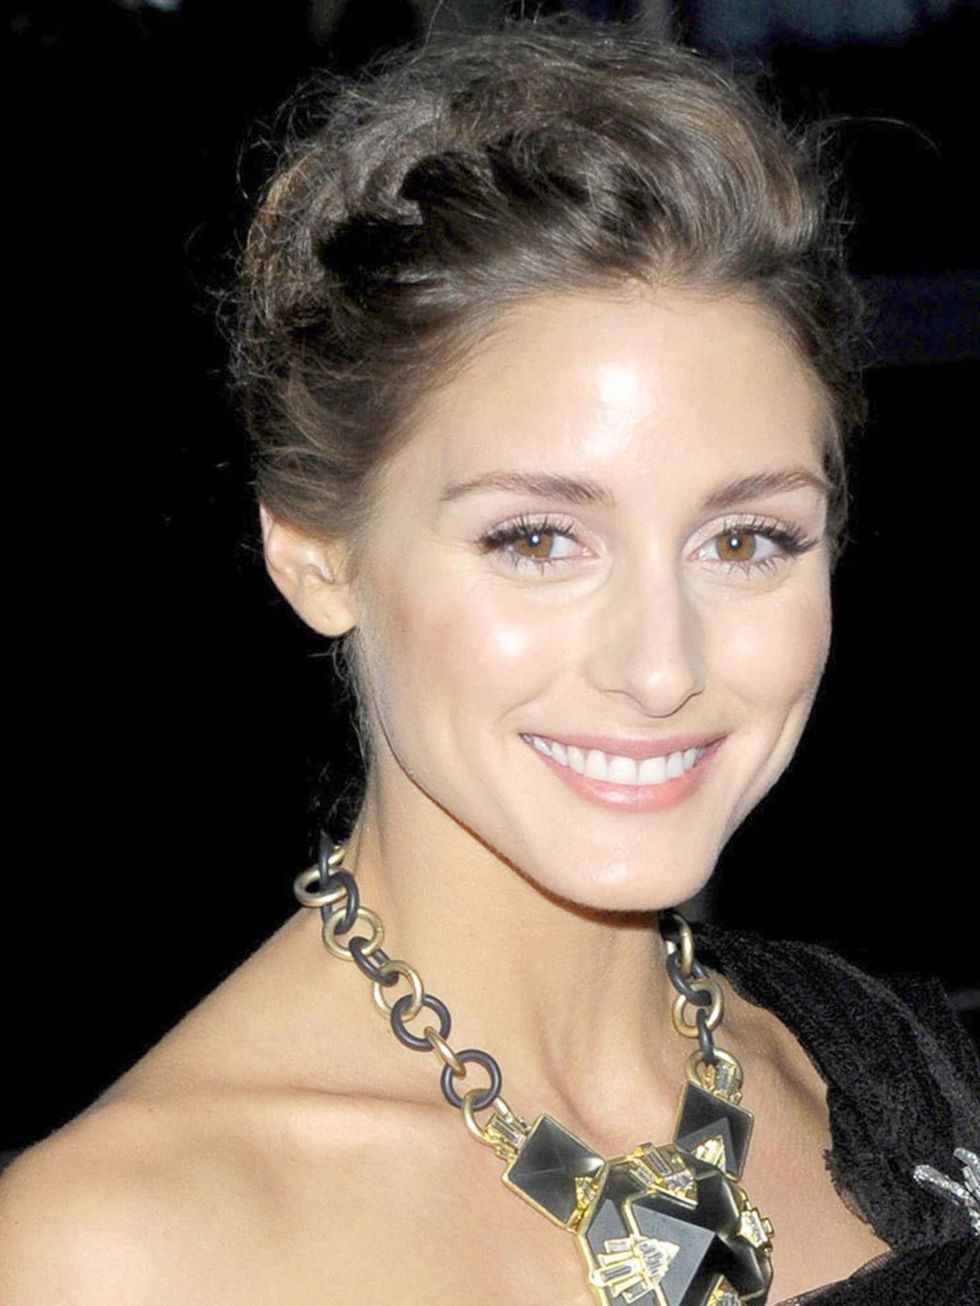 <p><a href="http://www.elleuk.com/star-style/celebrity-style-files/olivia-palermo">Olivia</a> manages to look ethereal yet mature in her LBD with a dusting of silver shadow.</p><p>ELLE Loves: <a href="http://www.bobbibrown.co.uk/product/2330/20493/Makeup/